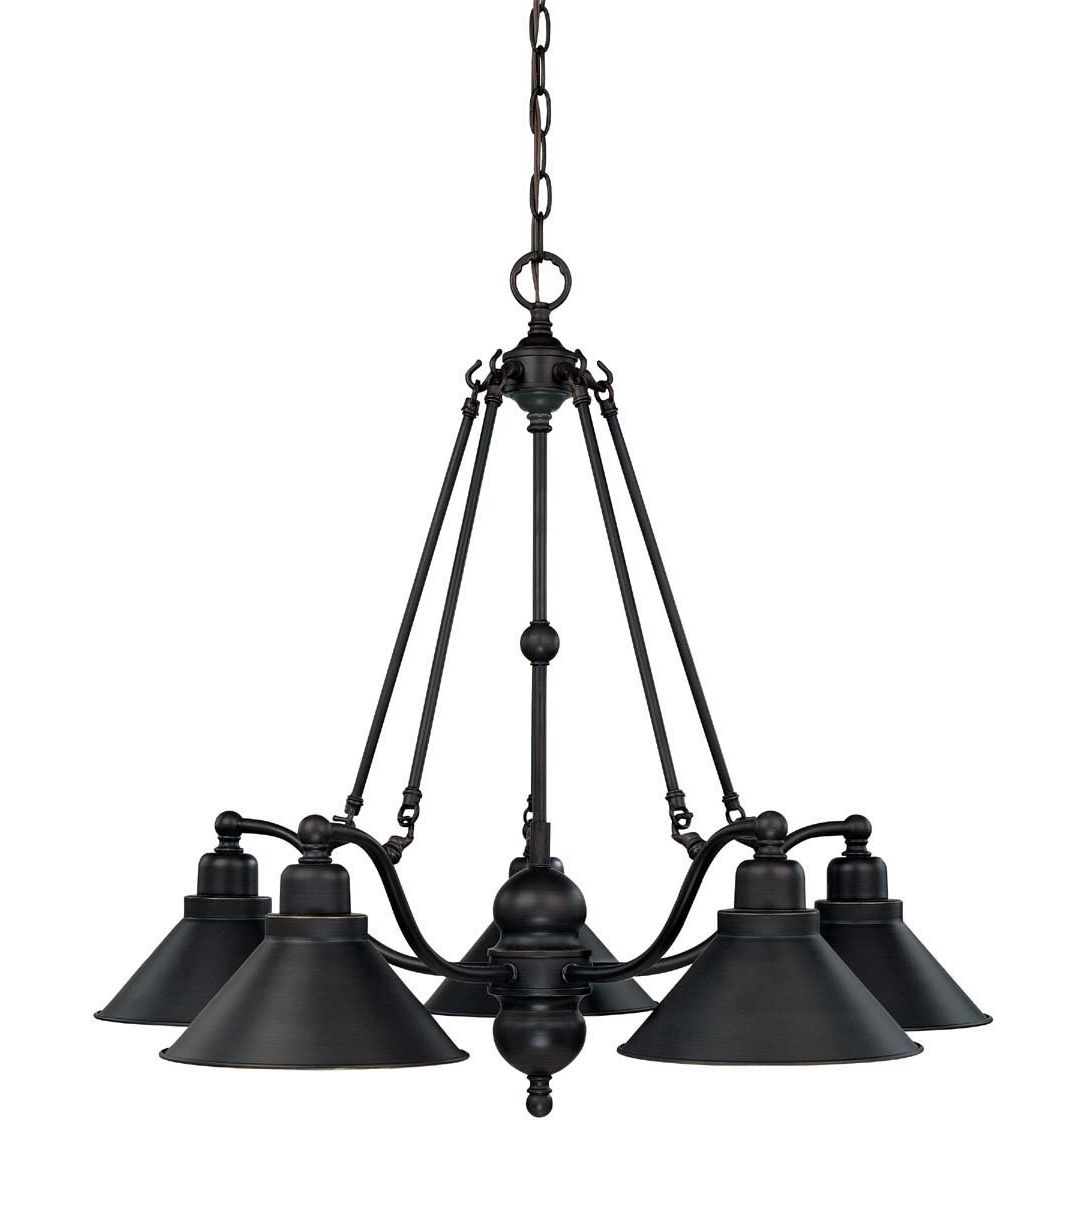 Alayna 4 Light Shaded Chandeliers With Most Popular Silber 5 Light Shaded Chandelier (View 8 of 20)